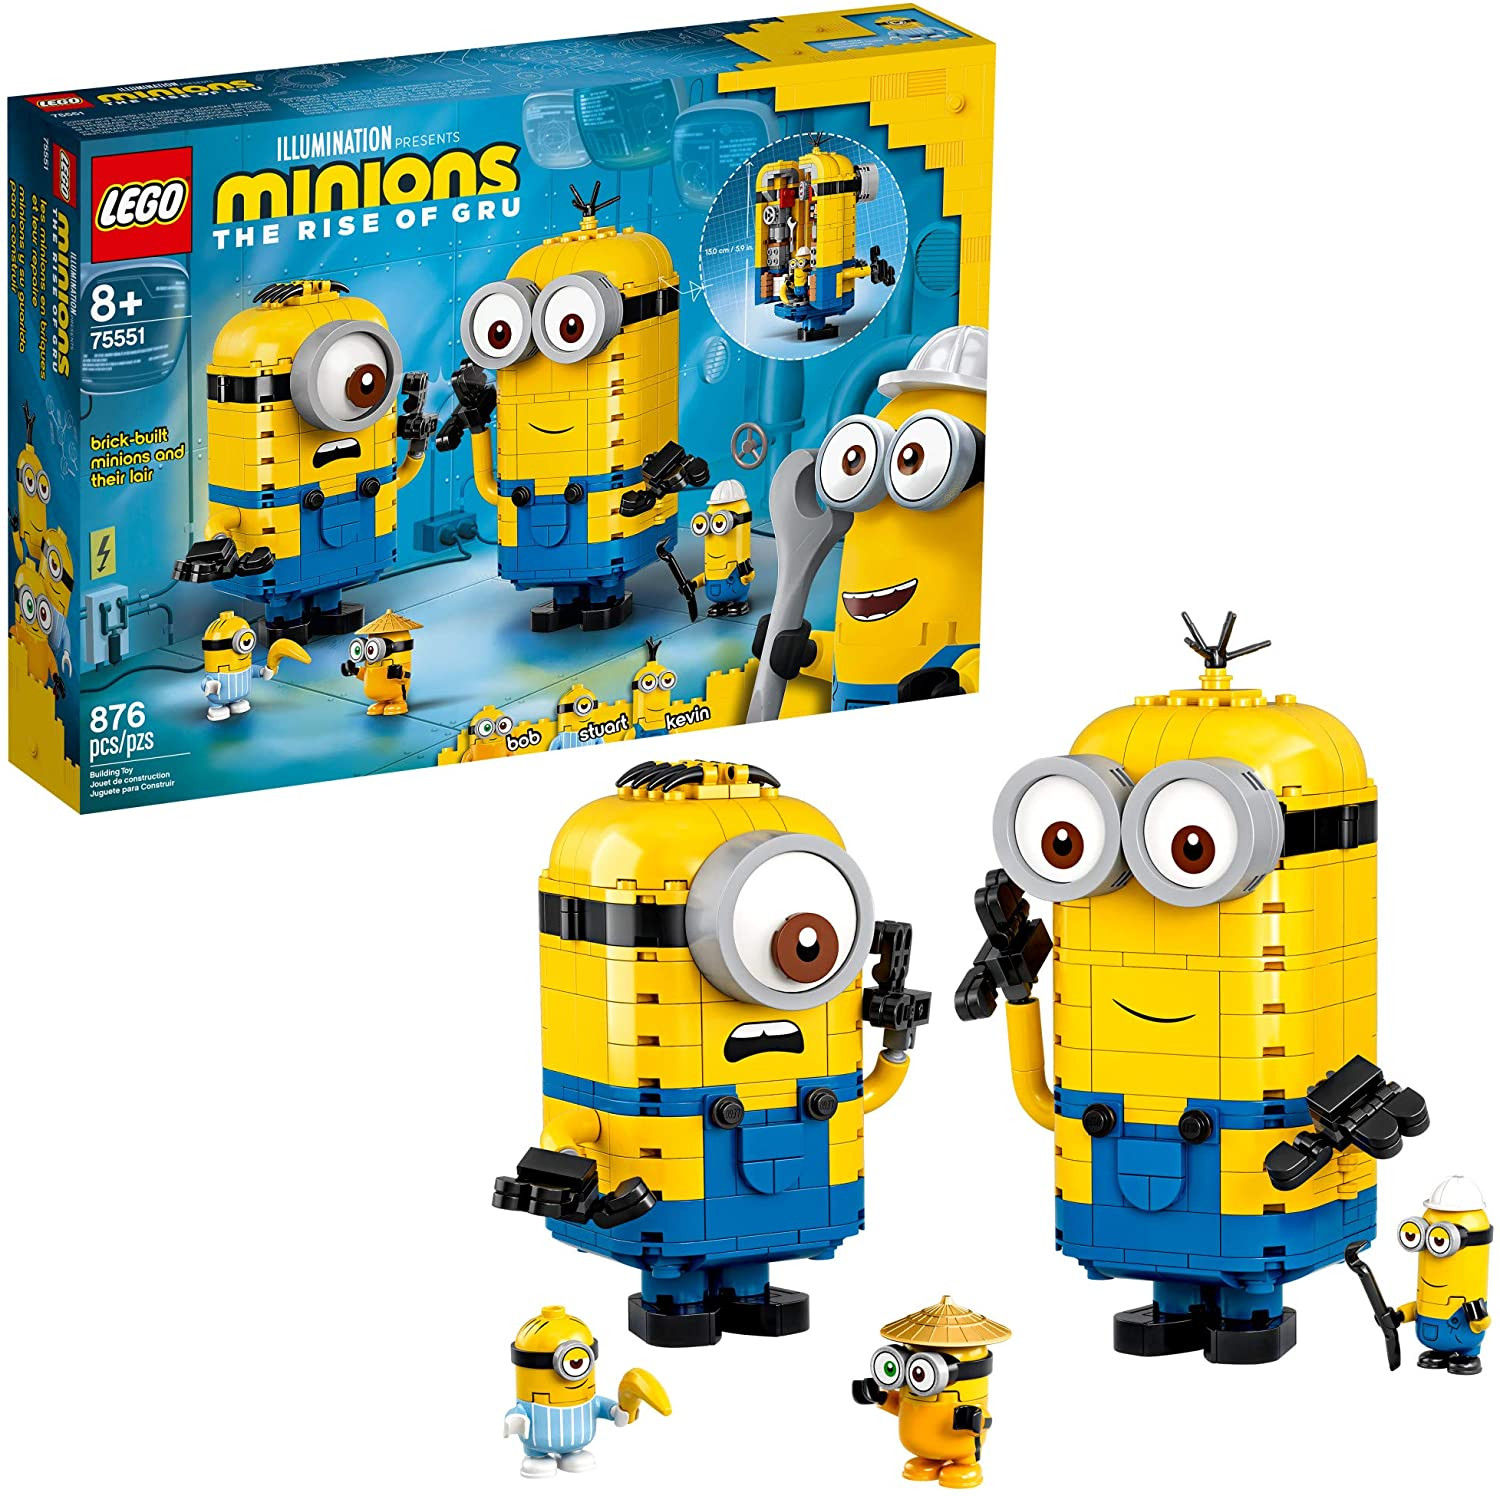 LEGO Minions: Brick-Built Minions and Their Lair (75551) Building Kit for Kids